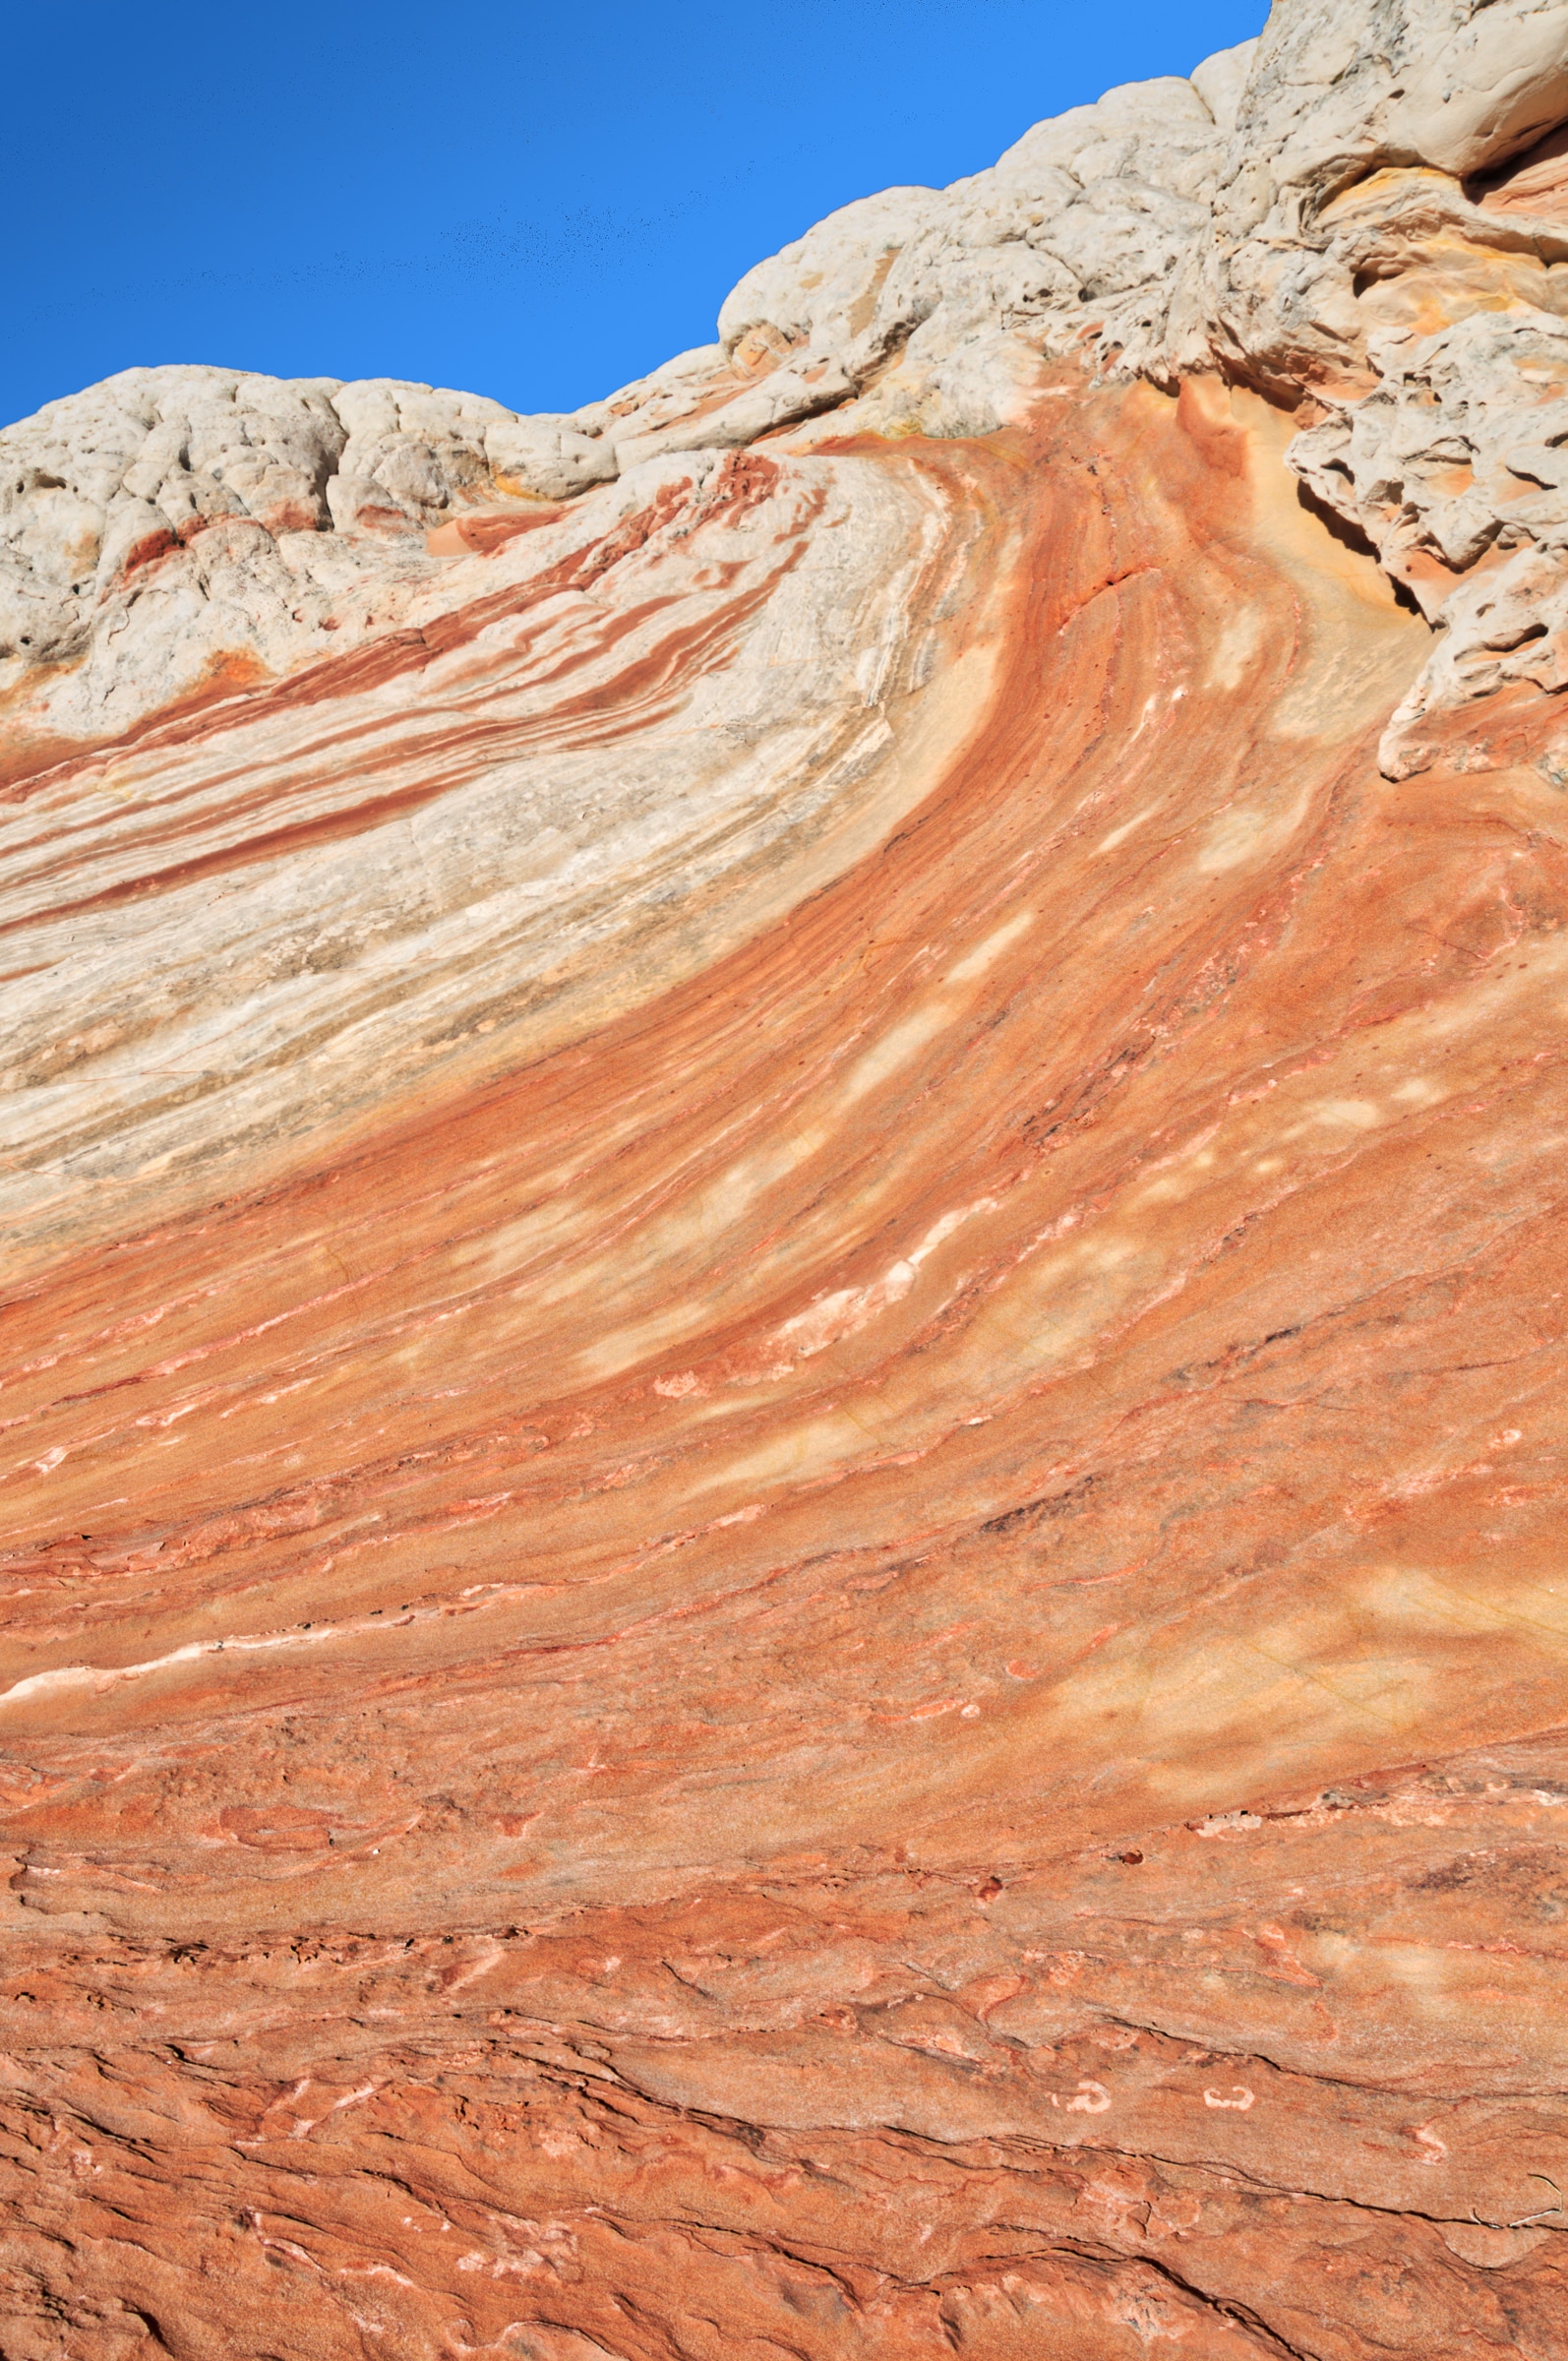 The mixture of laminated sandstone and brain rock look like a wave heading to shore in Vermillion Cliffs National Monument.